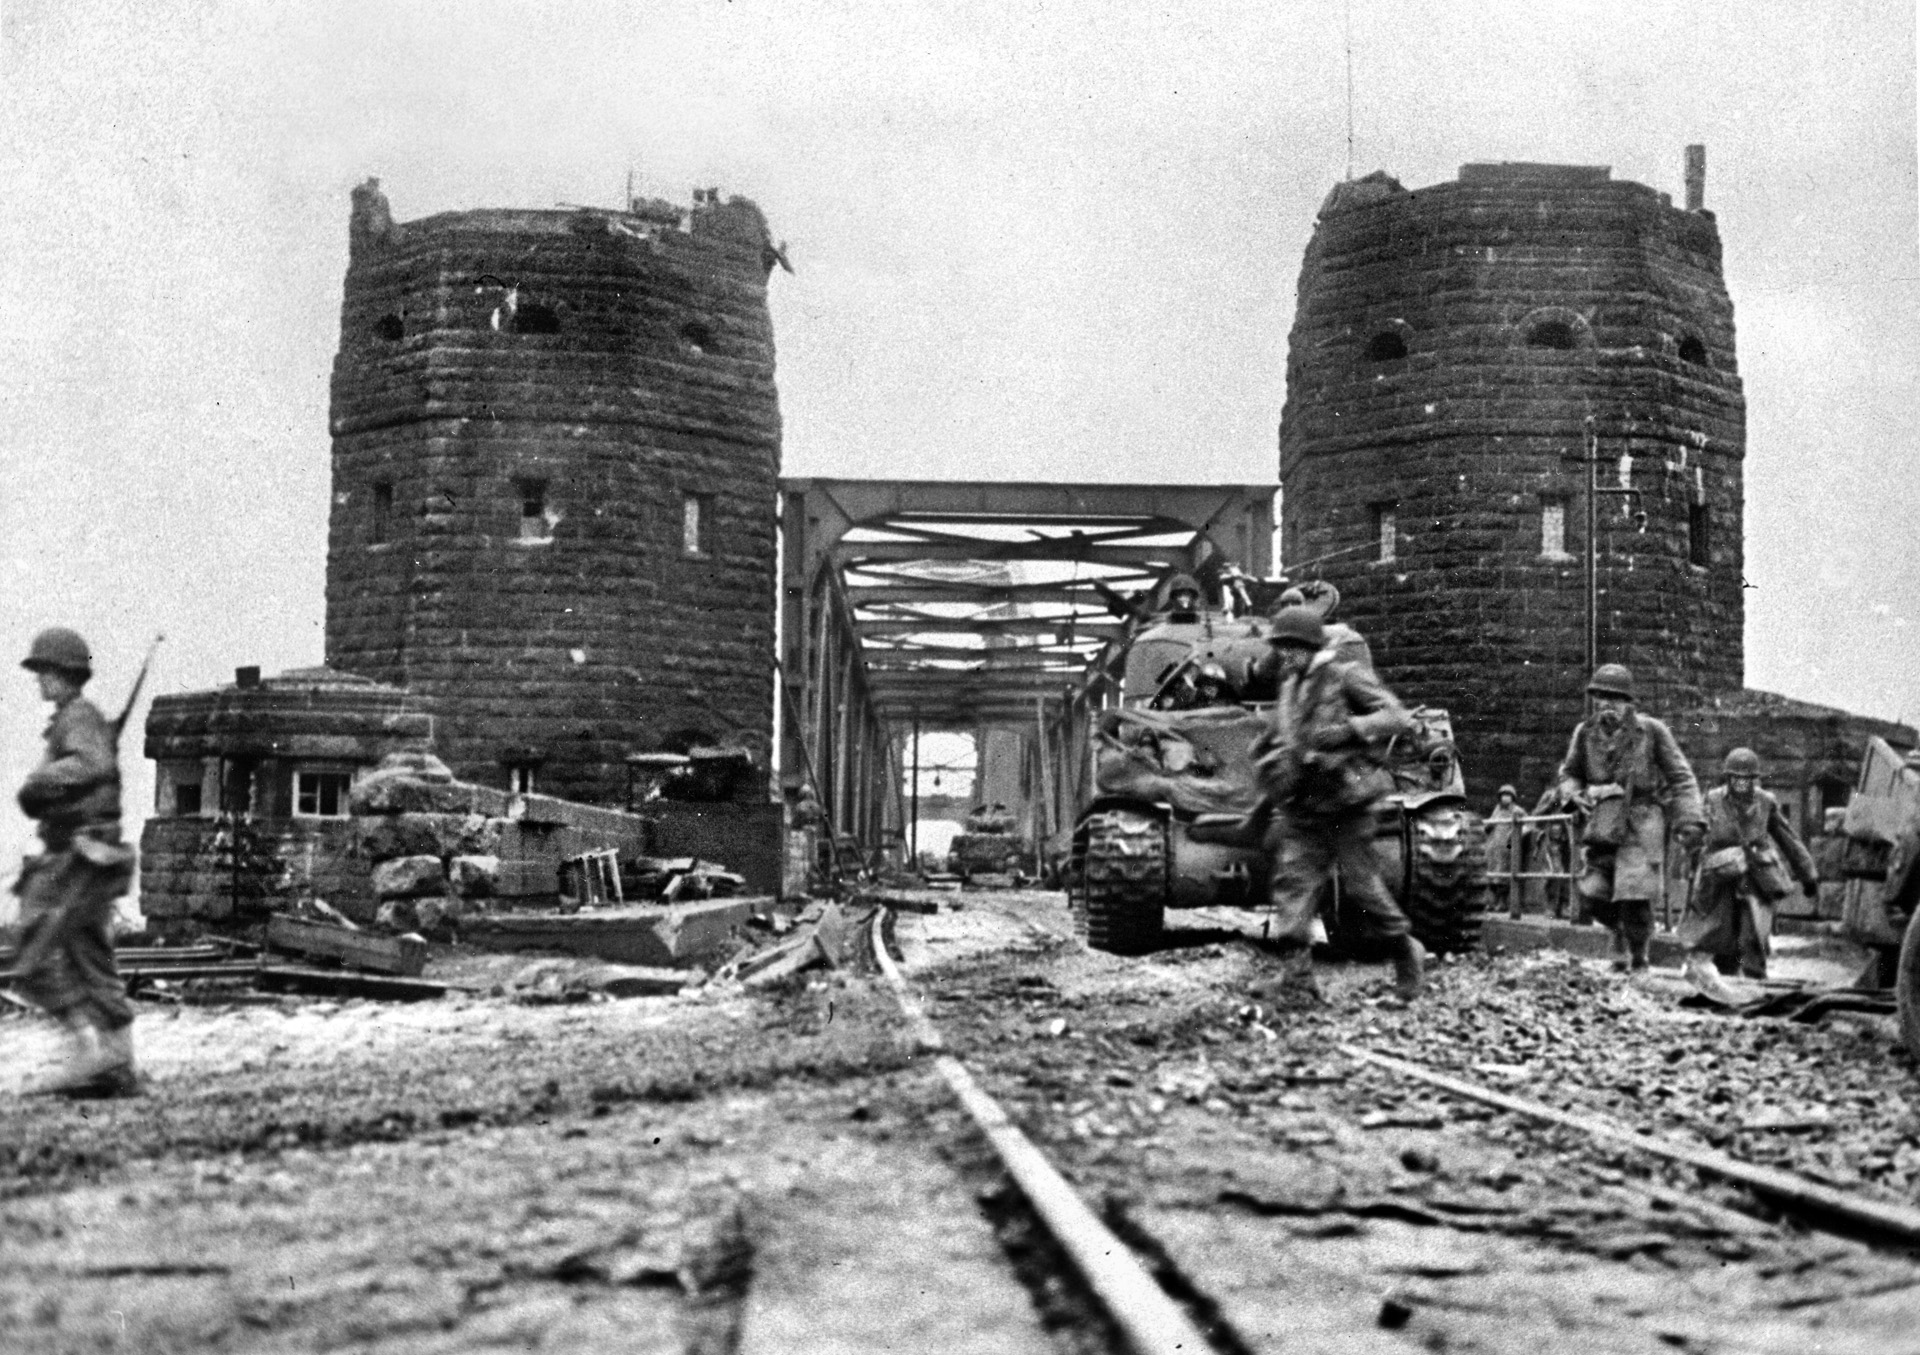 In this March 11, 1945, image, troops and M4 Sherman tanks of the U.S. First Army cross the Ludendorff railroad bridge to the eastern bank of the great Rhine River. The last natural barrier along the western frontier of Germany, the Rhine was also crossed by Allied armies in other locations.